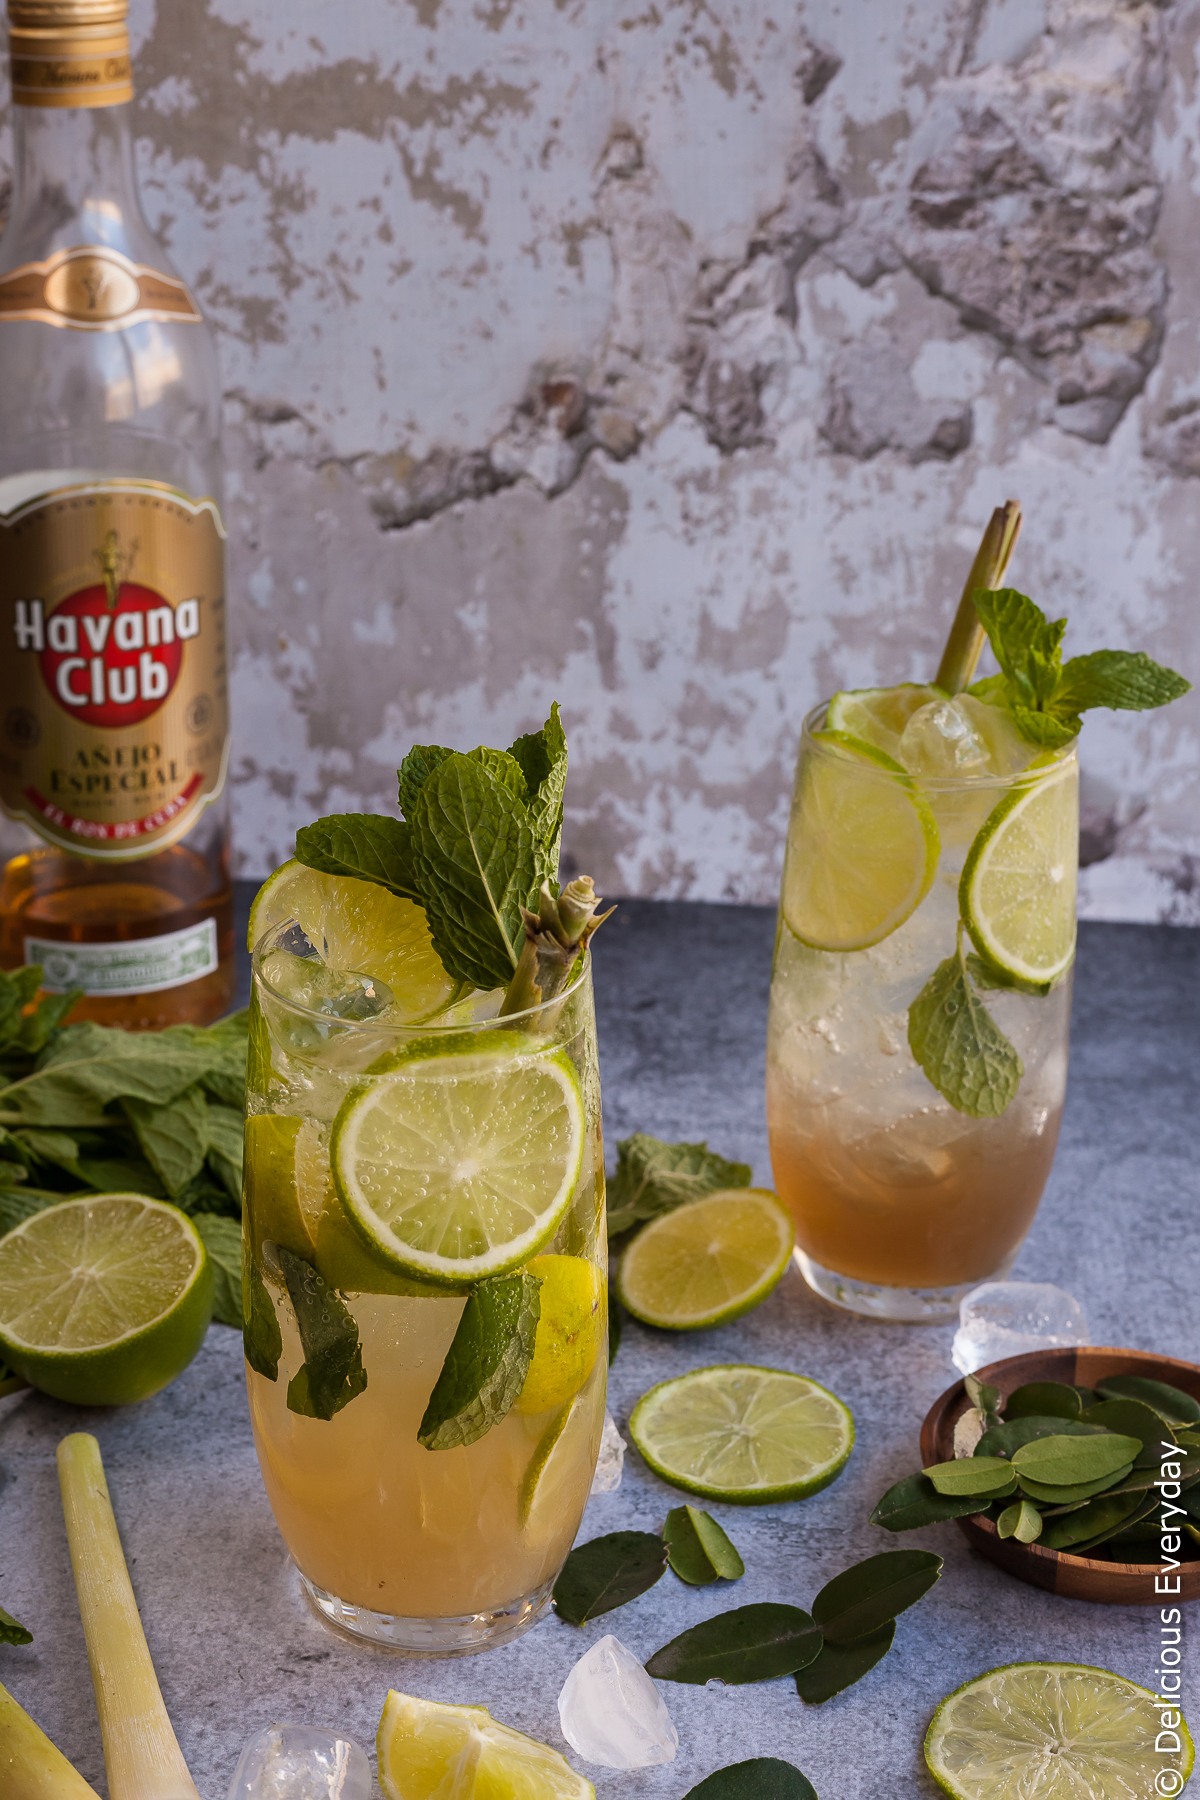 This Lemongrass, Kaffir Lime and Ginger Mojito is a beautiful update to the classic. Ginger adds a punchy kick while the lemongrass and kaffir lime add a lovely floral note.